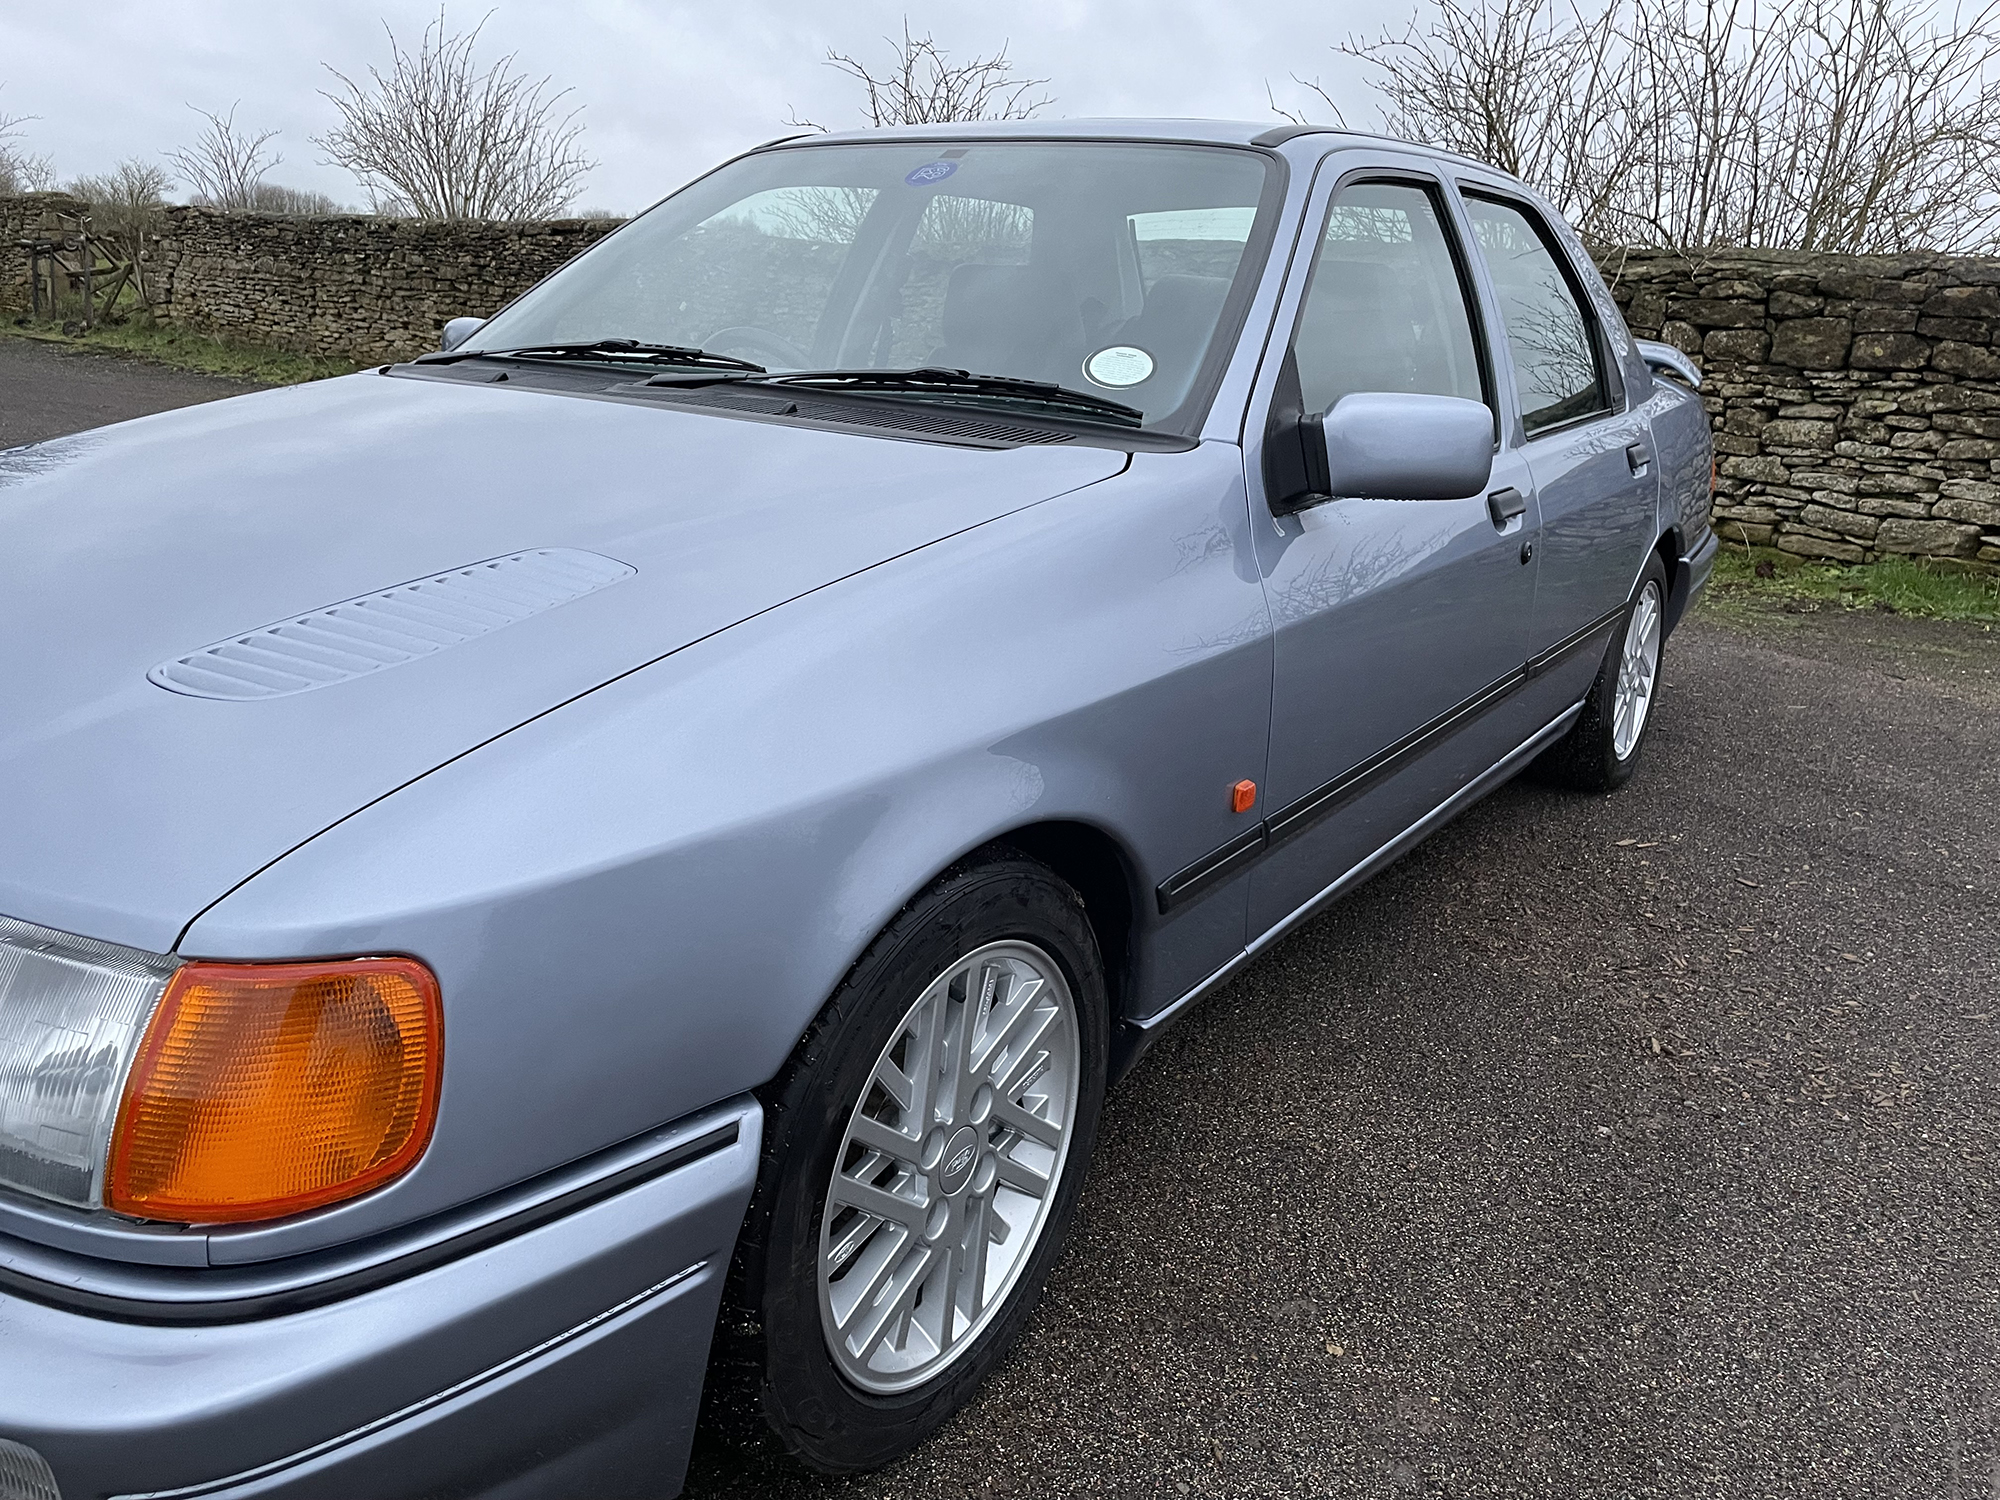 1989 Ford Sierra RS Cosworth Reg. no. G381 KWJ Chassis no. WF0FXXGBBFKR01249 - Image 10 of 26